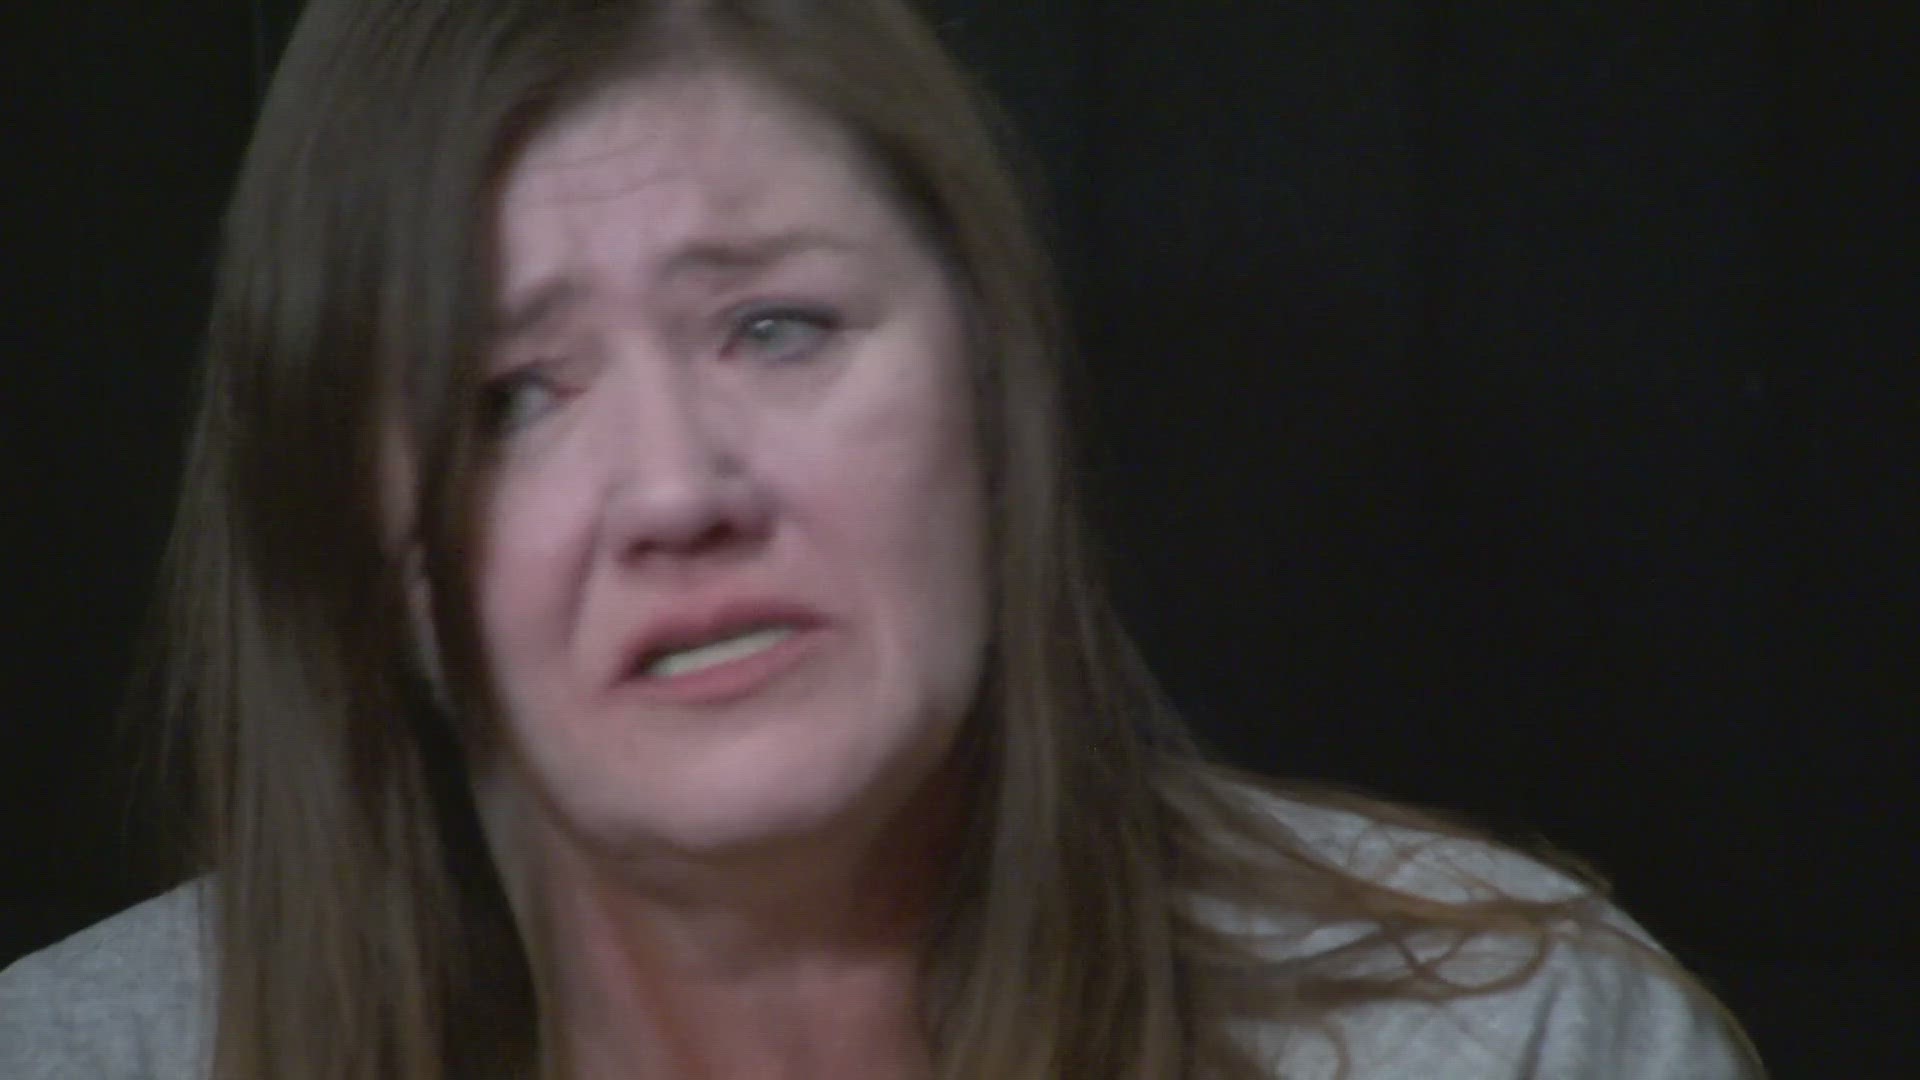 A Texas mother is demanding answers about her son's in-custody death.